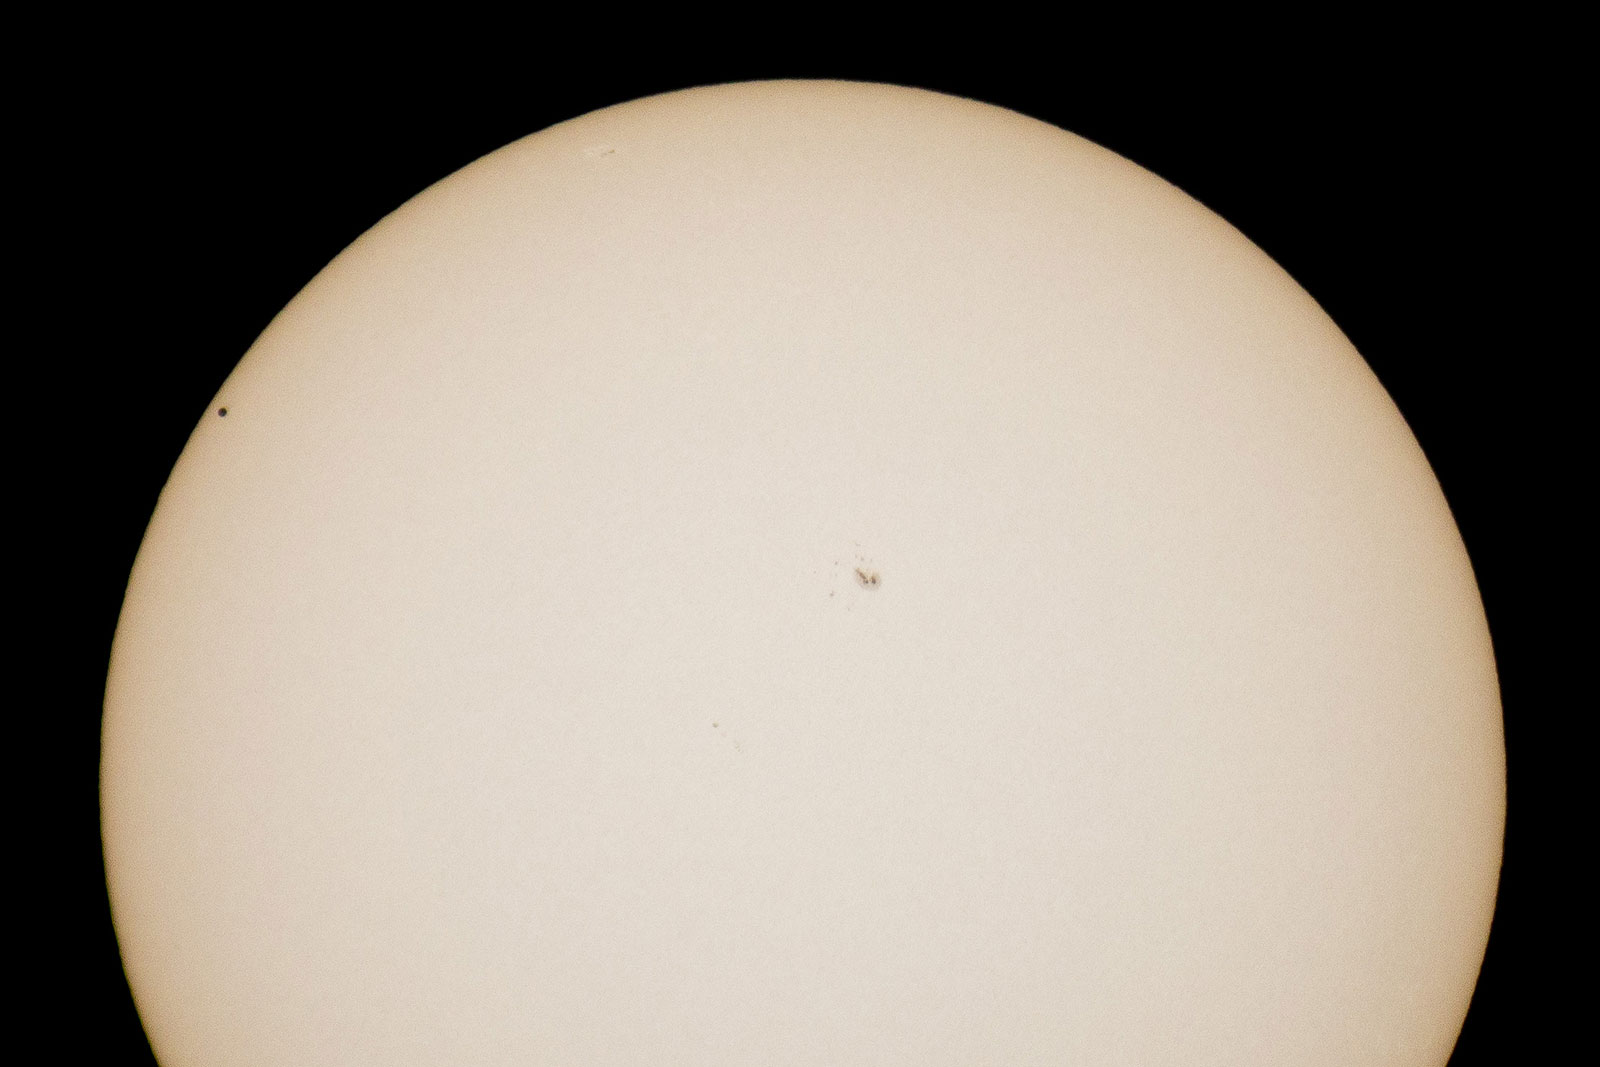 Set of ND8 and ND1000 filters (Mercury transit).